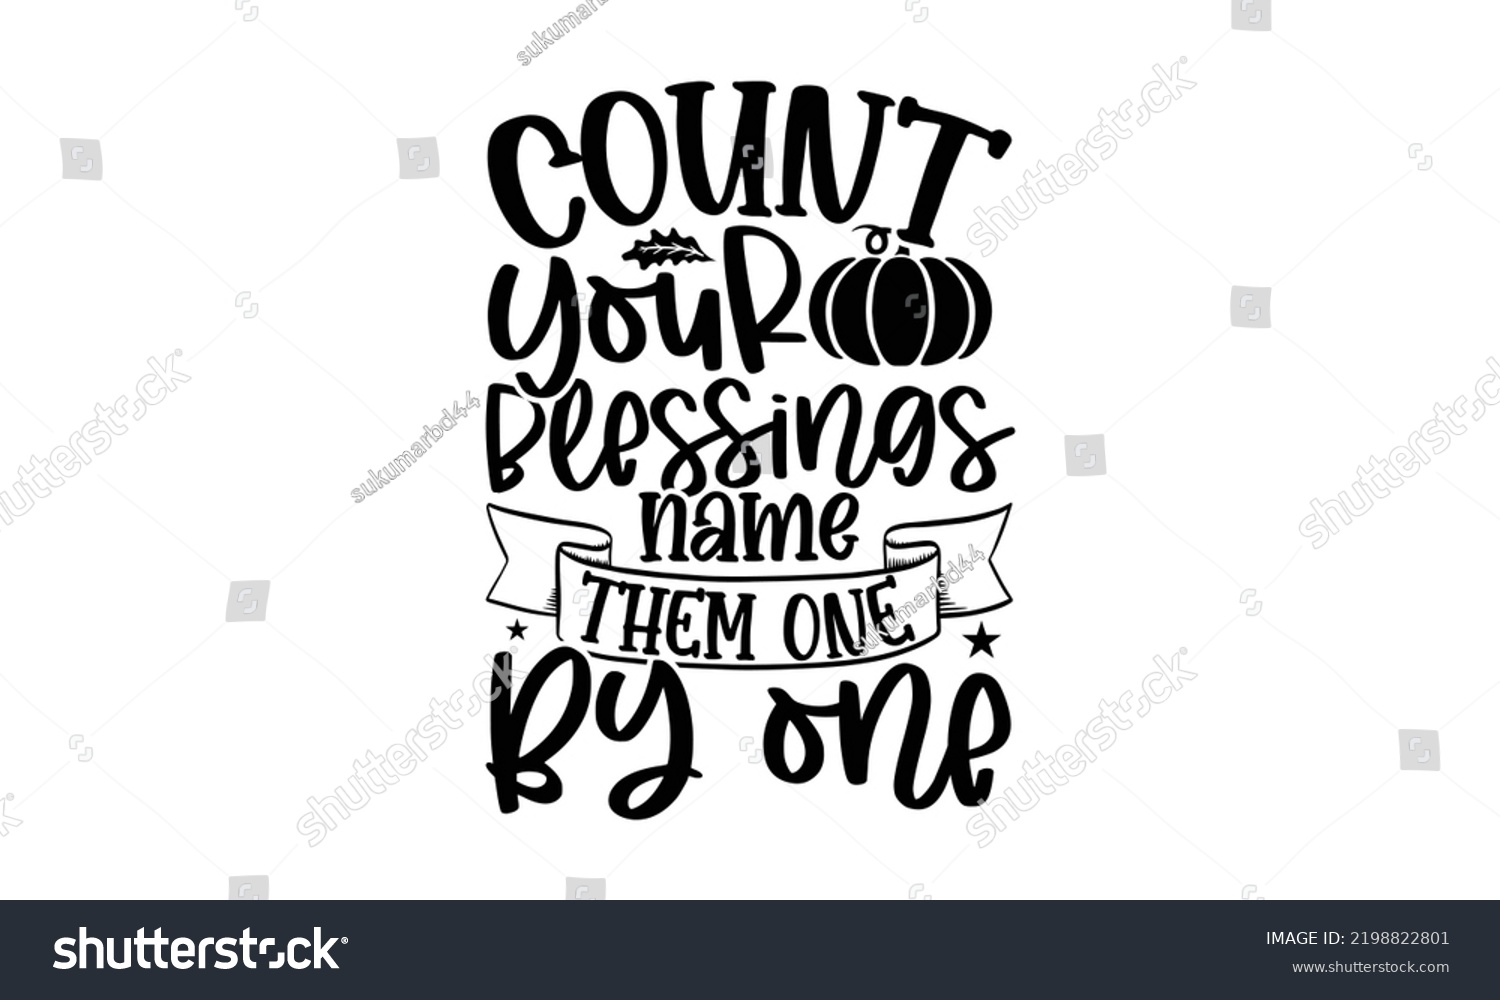 SVG of Count Your Blessings Name Them One By One - Thanksgiving T-shirt Design, Hand drawn lettering phrase, Calligraphy graphic design, EPS, SVG Files for Cutting, card, flyer svg